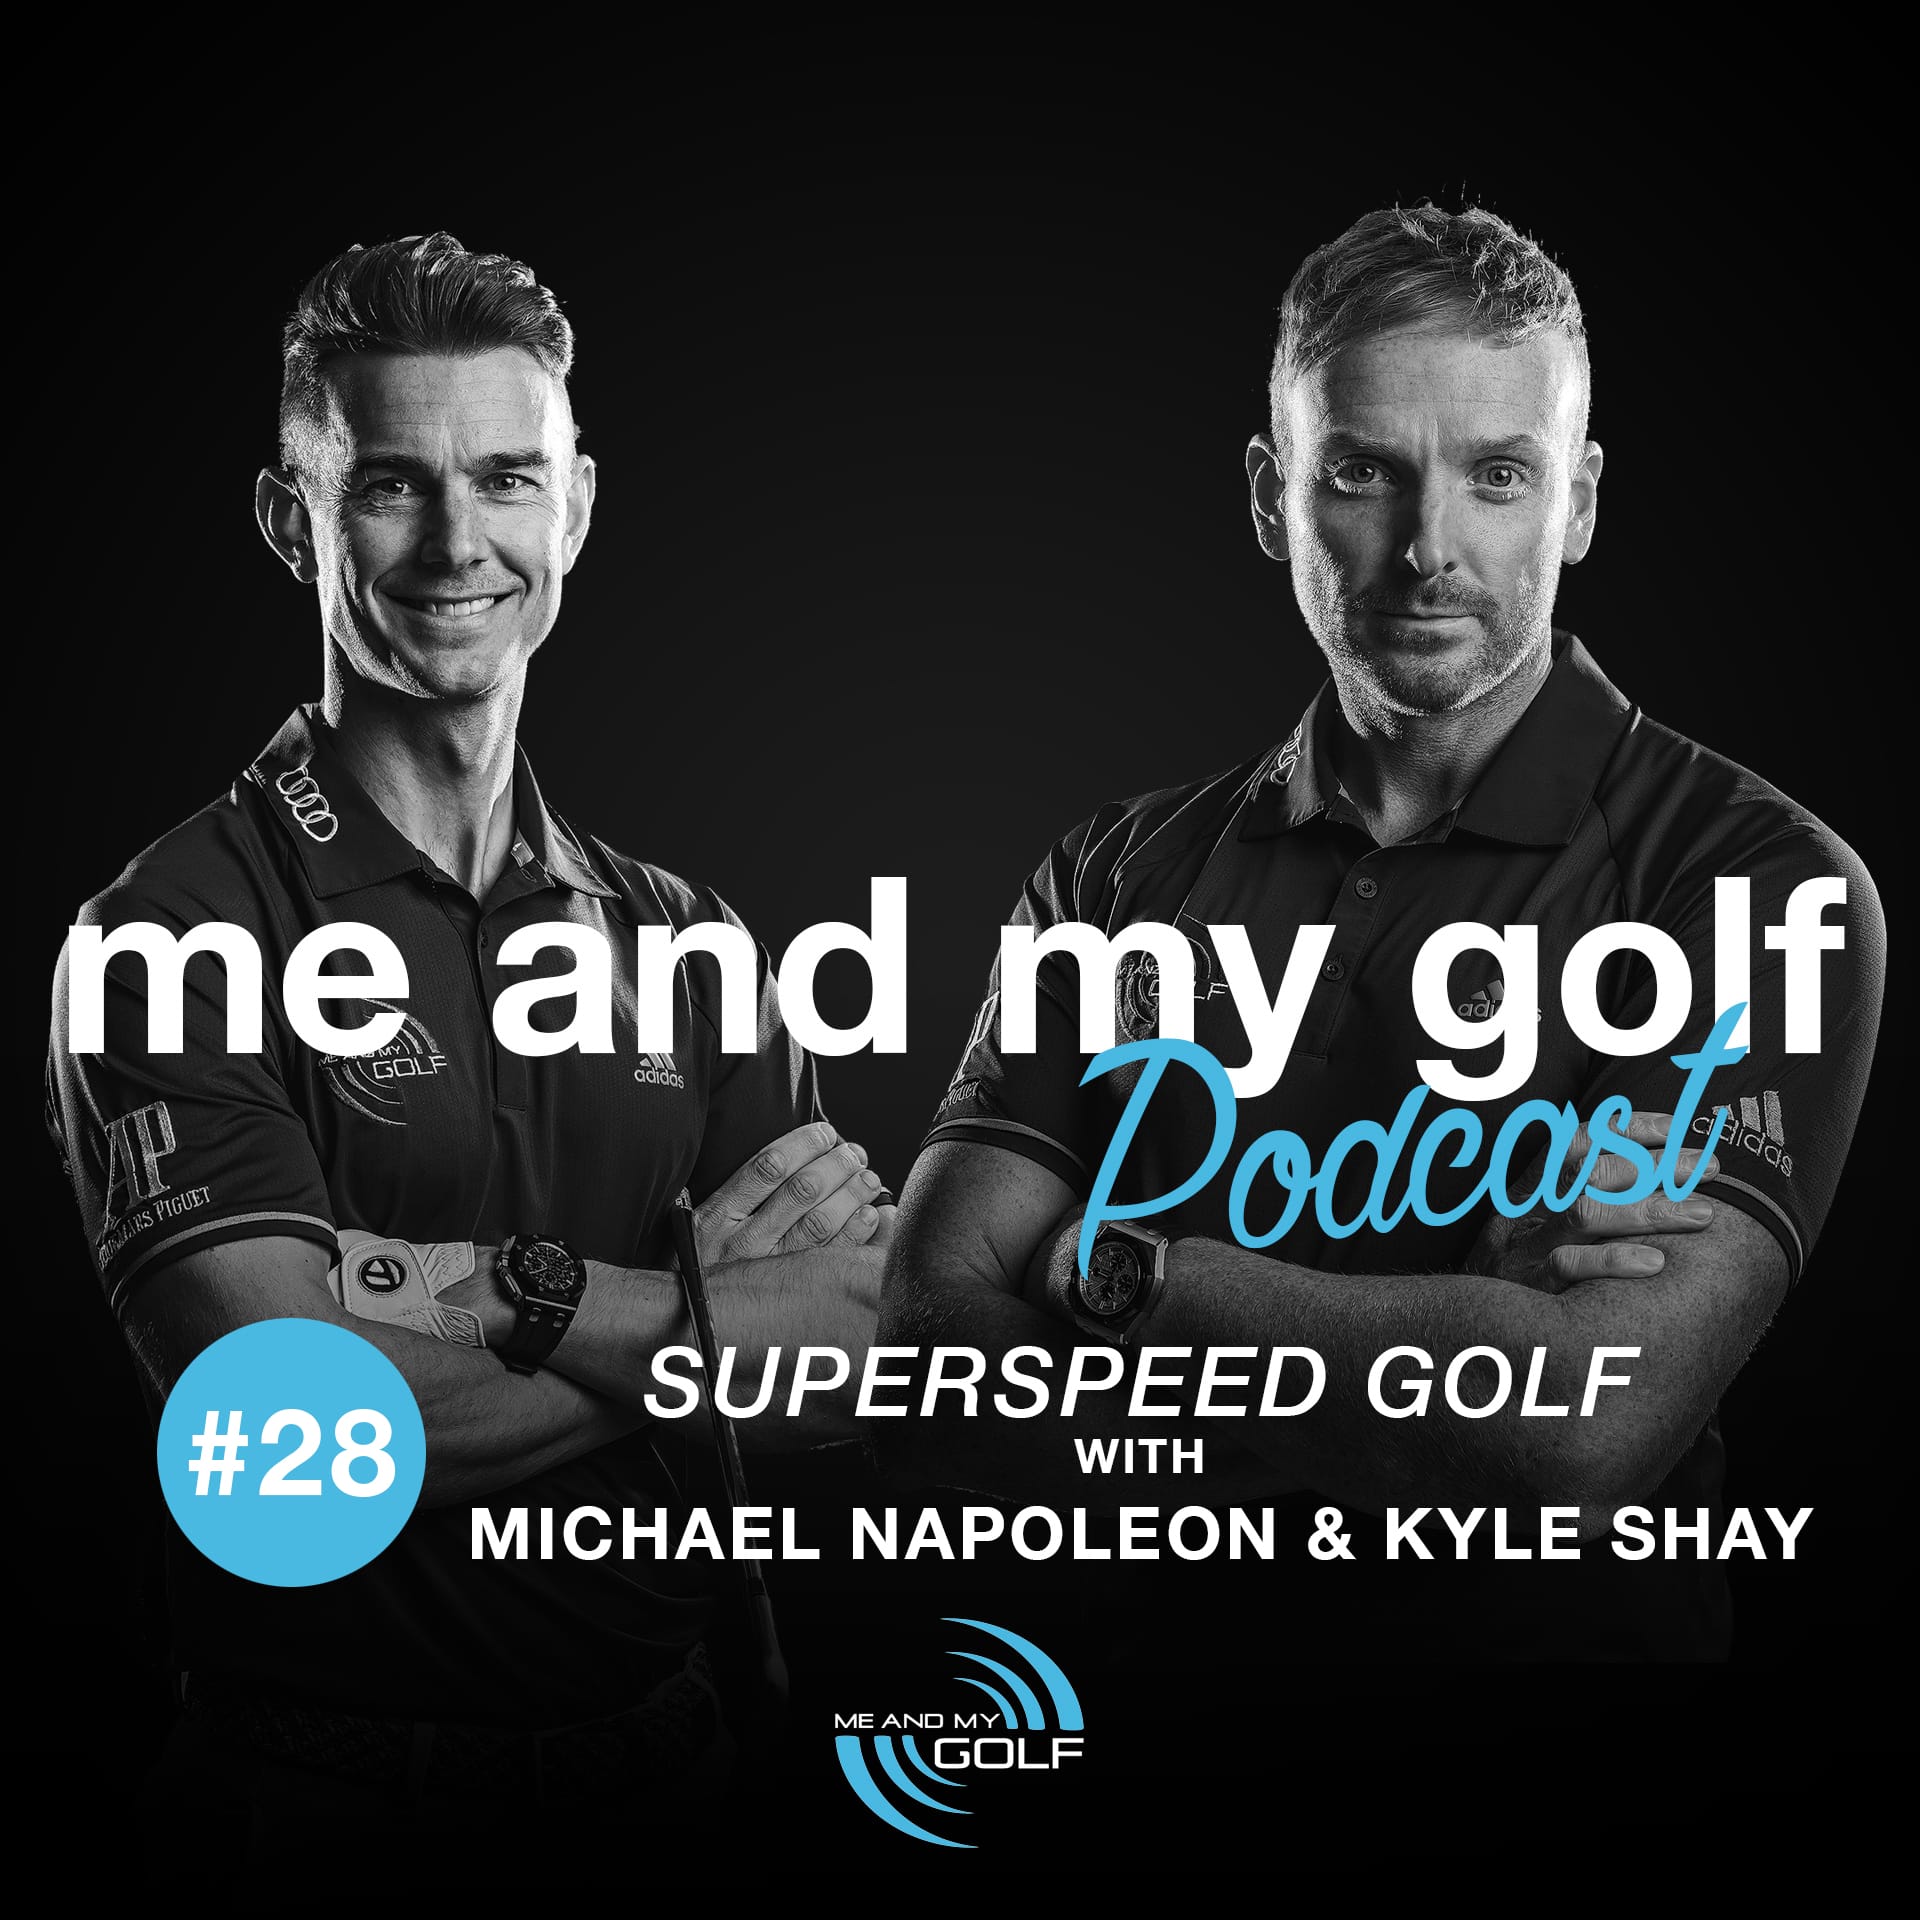 What The Worlds Best Are Using To Create “Super Speed” With Michael  Napoleon And Kyle Shay - Me And My Golf